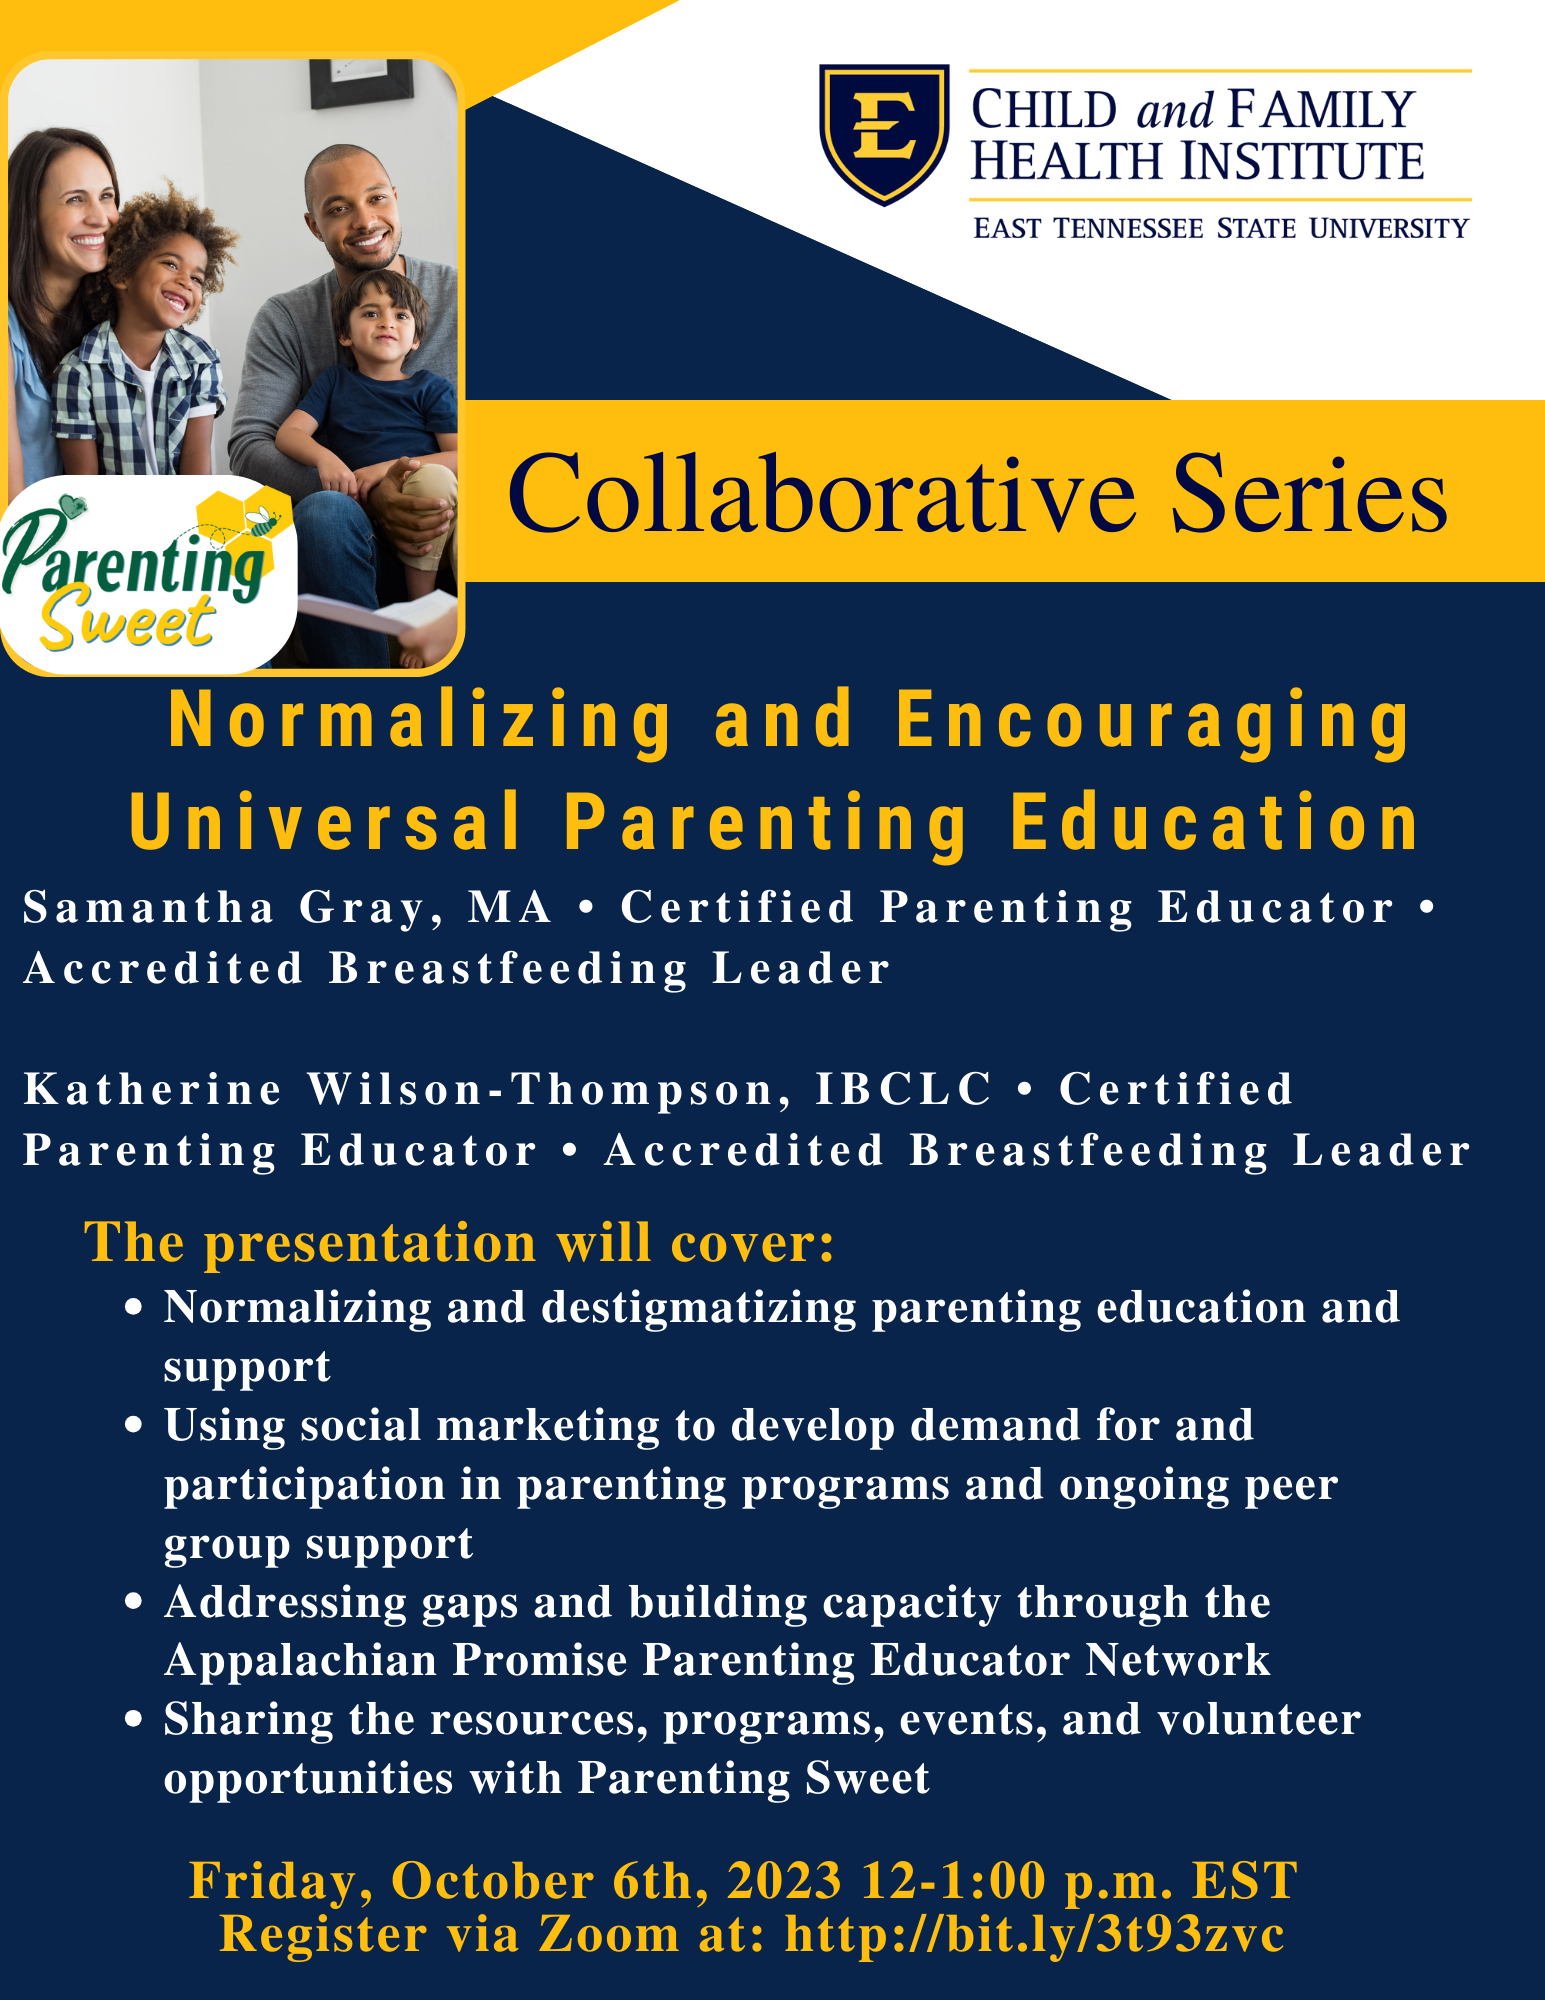 CFHI Collaborative Series - Normalizing and Encouraging Universal Parenting Education - Samantha Gray, MA and Katherine Wilson-Thompson, IBCLC Banner